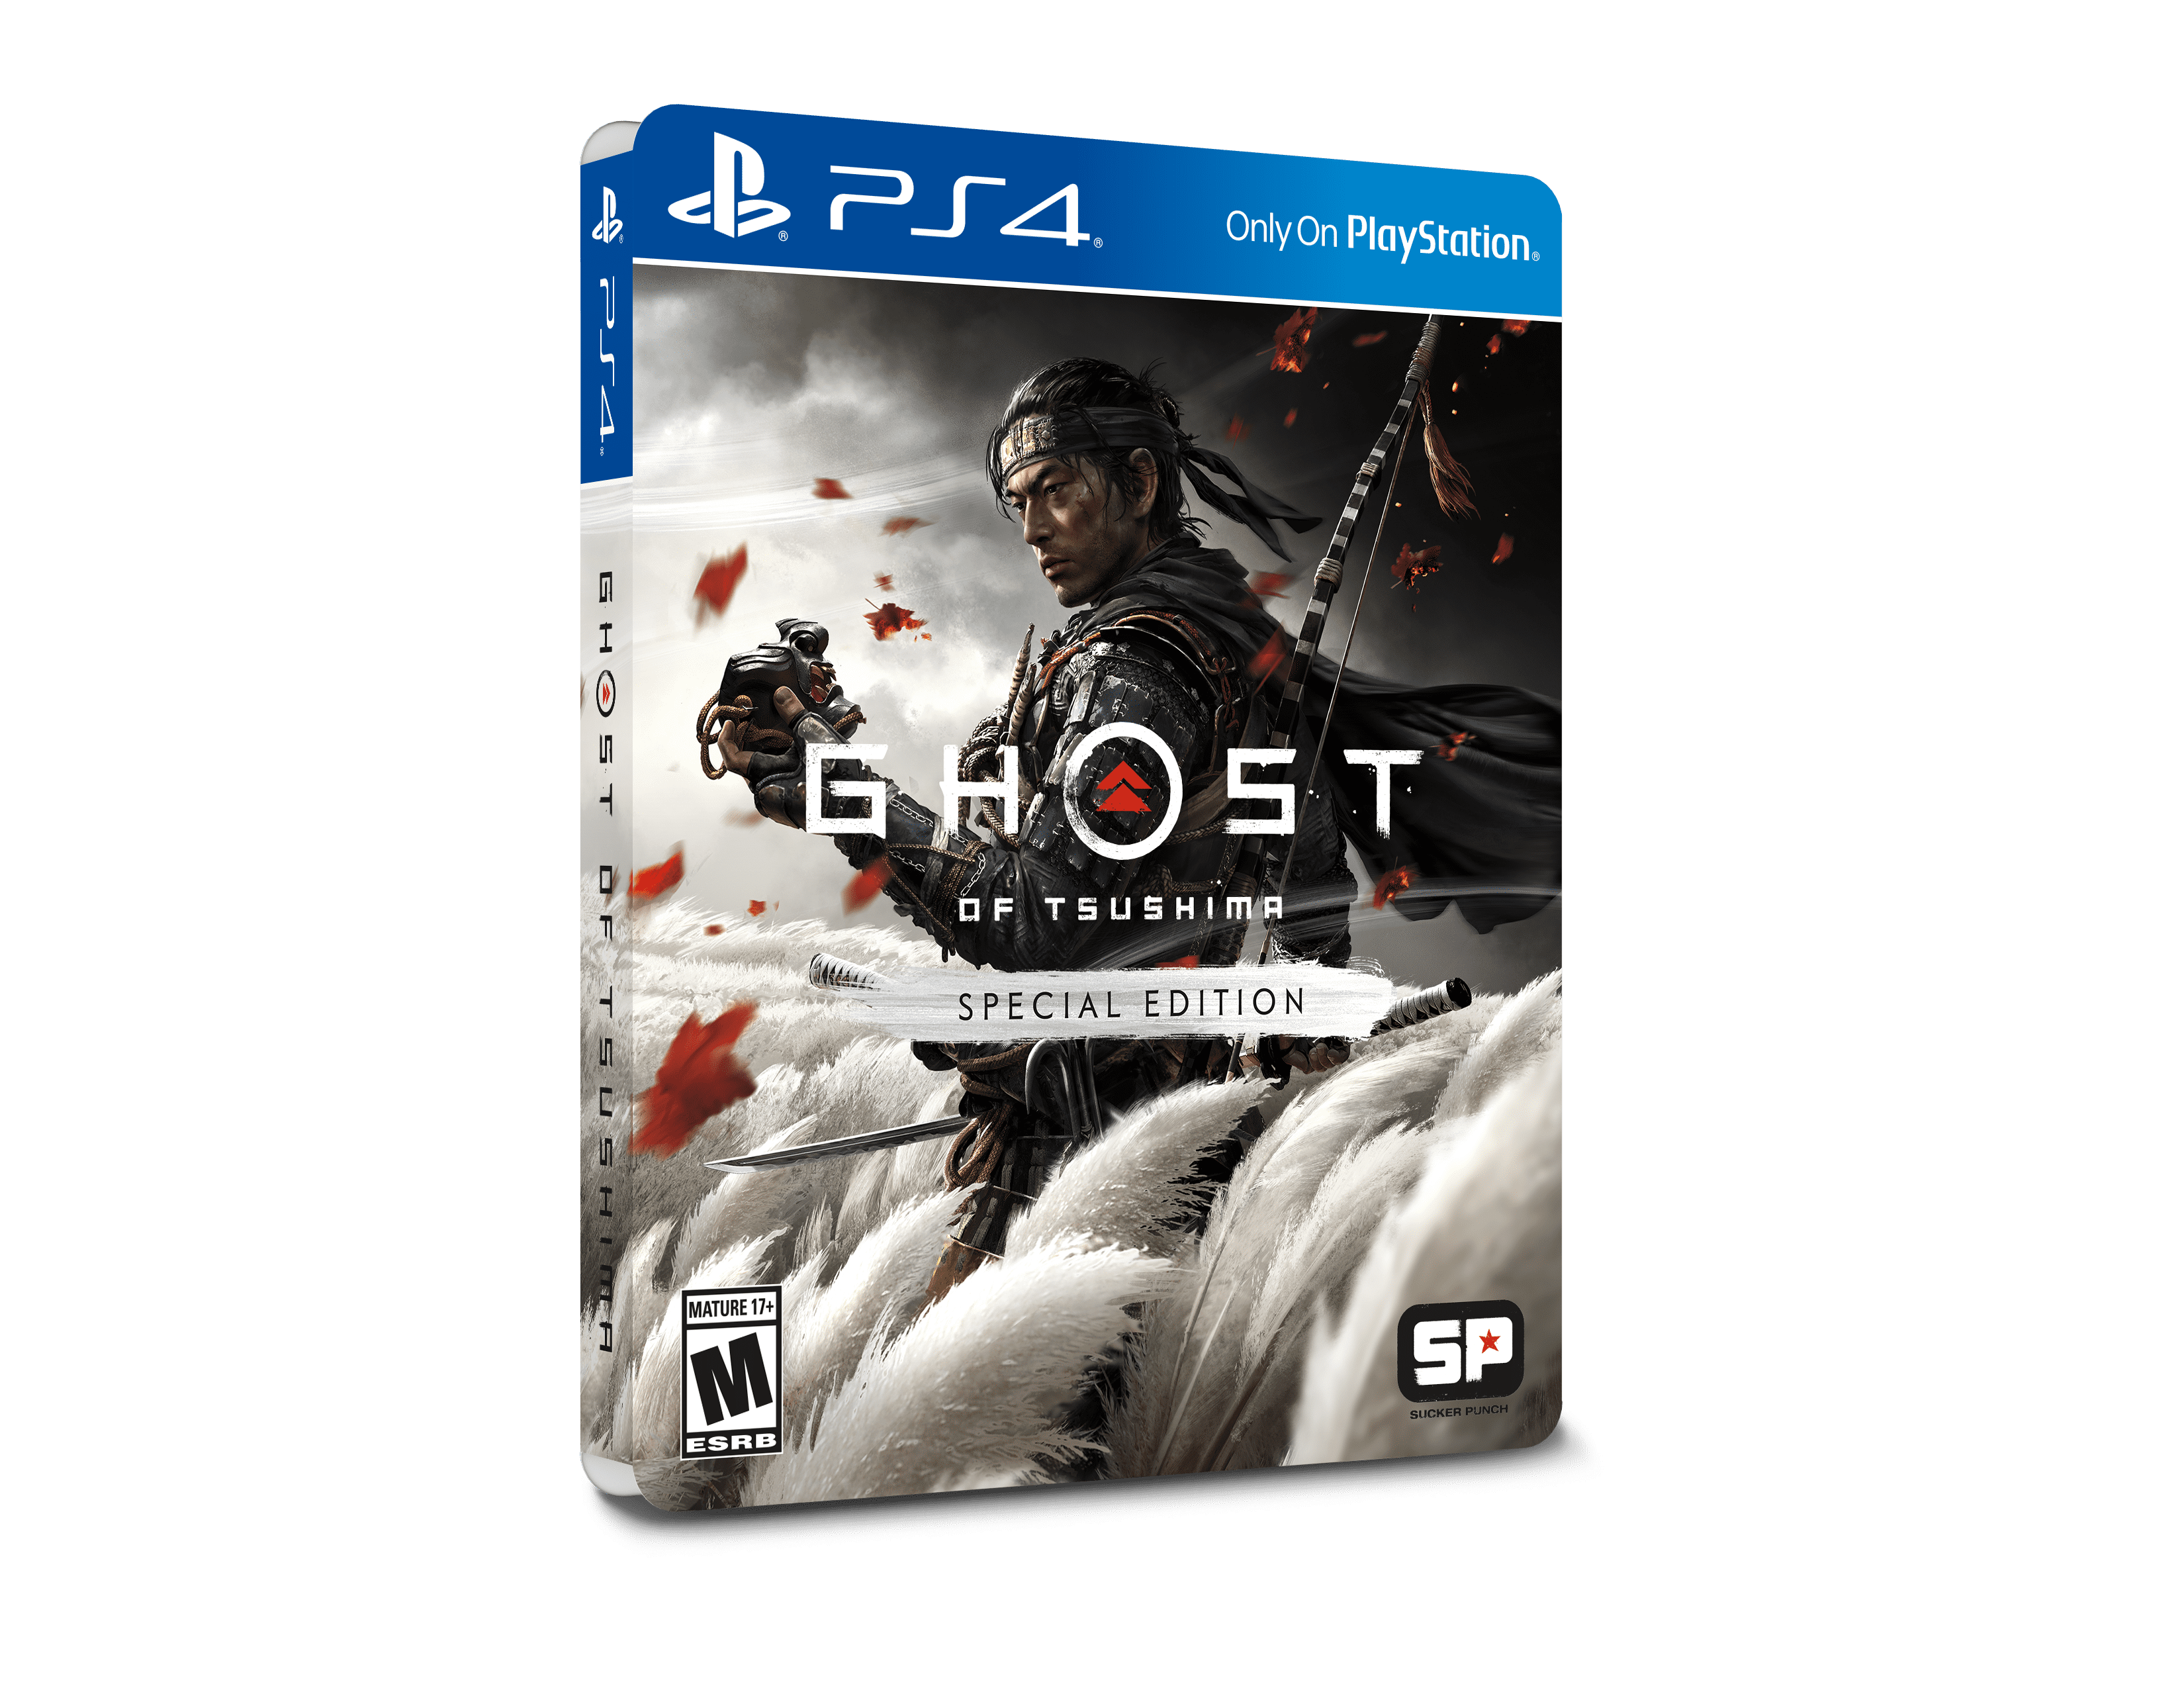 Sony PS4 Ghost of Tsushima Collector's Edition Video Game Bundle 3003936 -  US